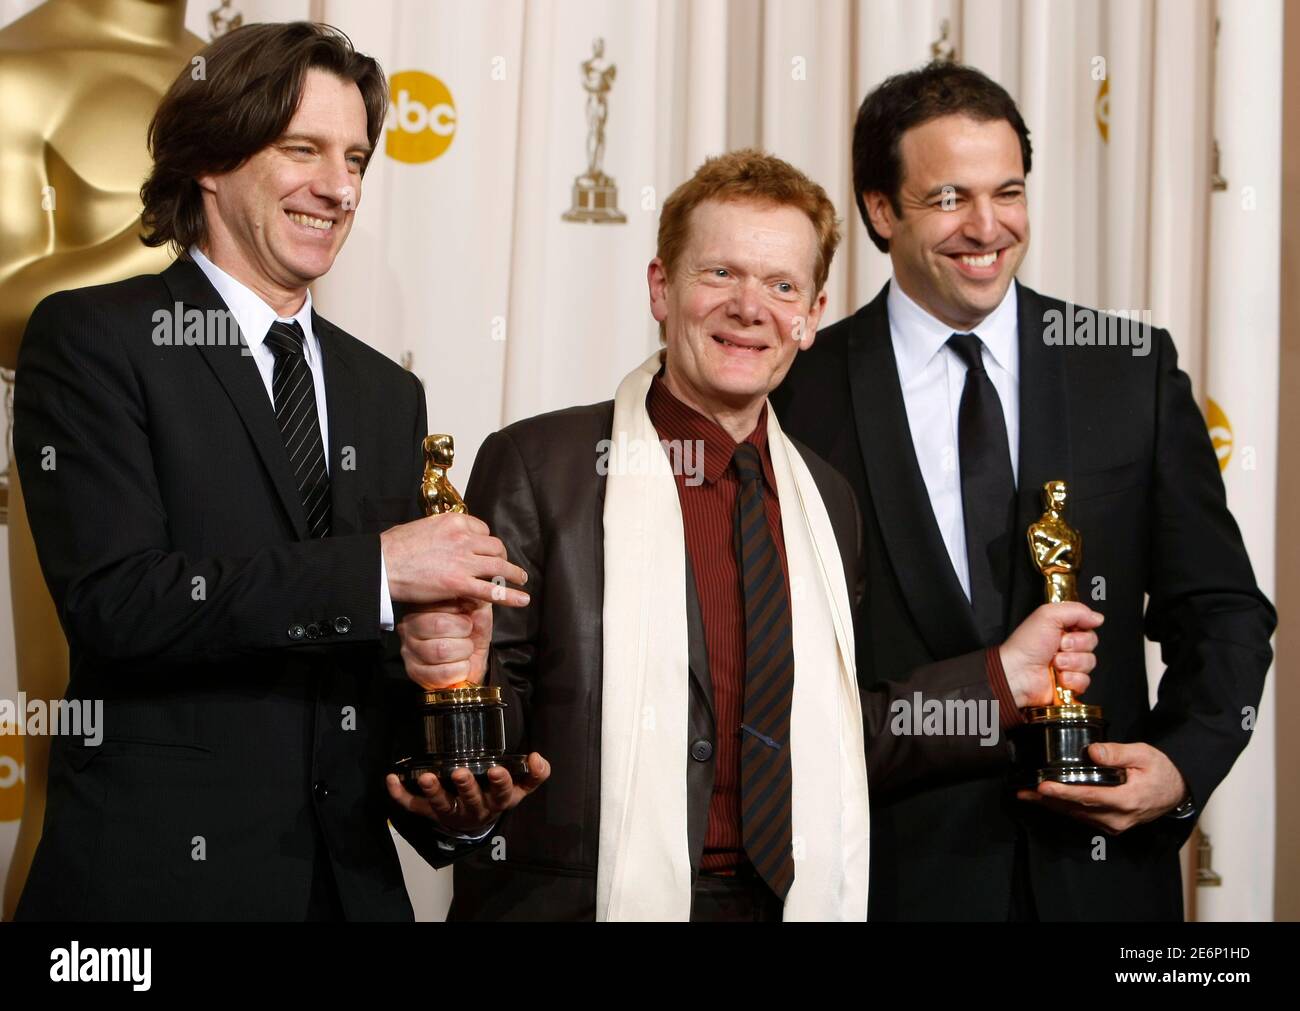 Oscar winners for the documentary feature 'Man On Wire' Simon Chinn (R) and James Marsh (L) pose with Philippe Petit, whose story is told in the film,' backstage at the 81st Academy Awards in Hollywood, California, February 22, 2009.  REUTERS/Mike Blake  (UNITED STATES) (OSCARS-BACKSTAGE) Stock Photo